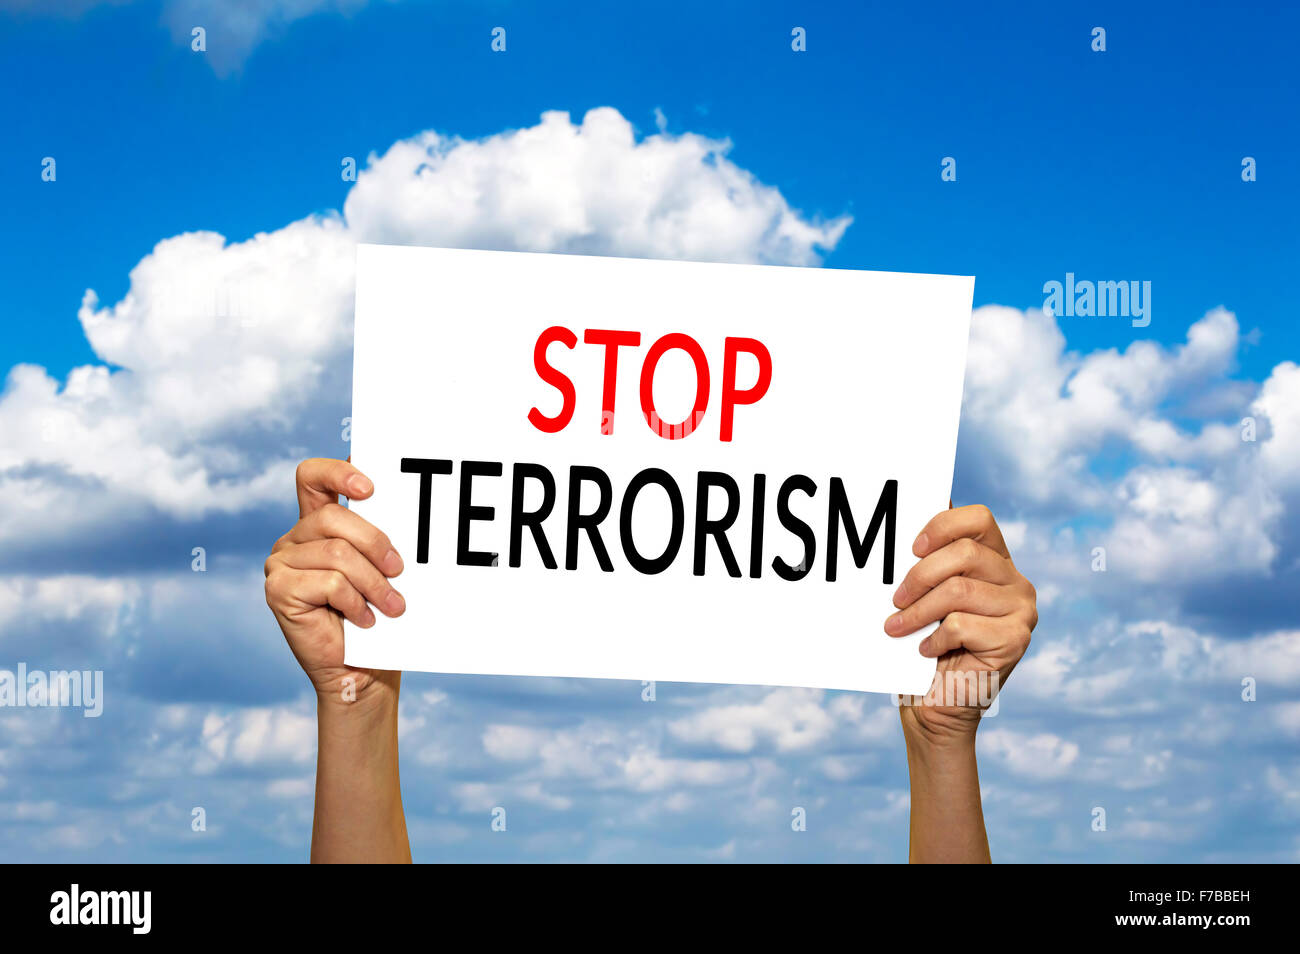 STOP TERRORISM card in hand against blue sky with clouds. Selective focus. Stock Photo